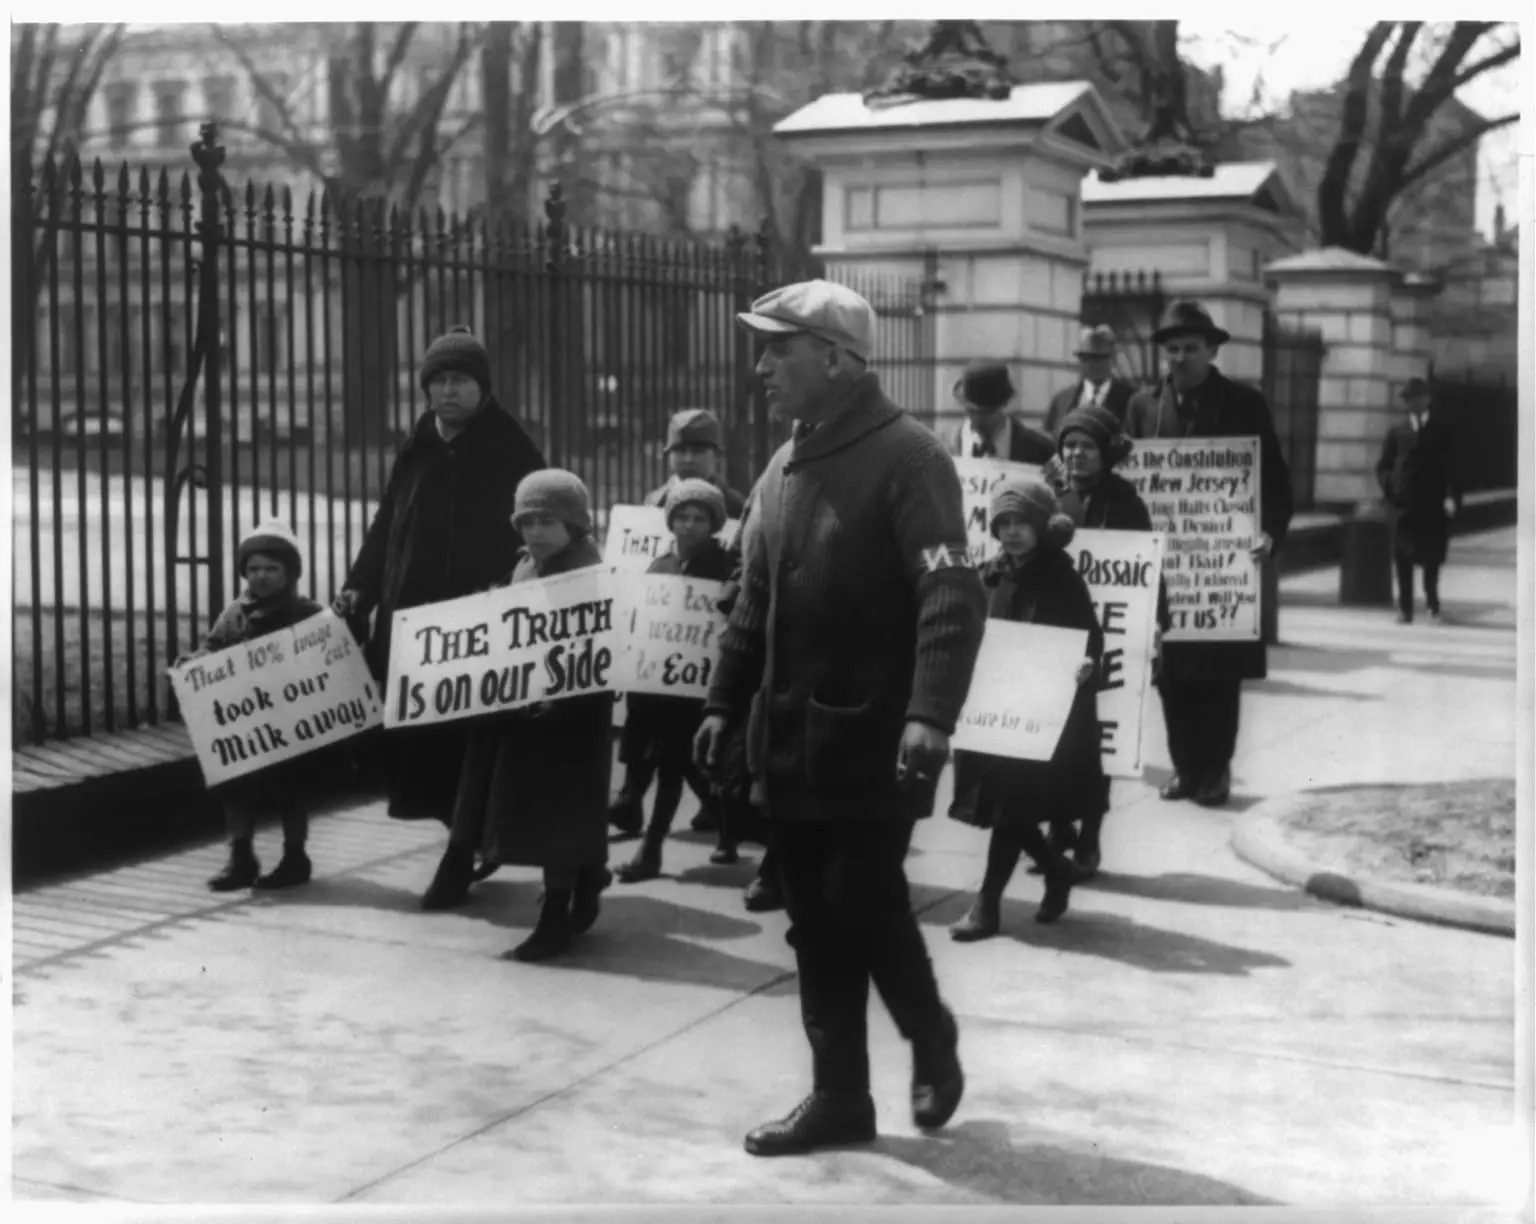 Four adults and six children, from Passaic, N.J., picket the White House following President Coolidge's refusal to listen to their complaints about wage cuts in the textile industry